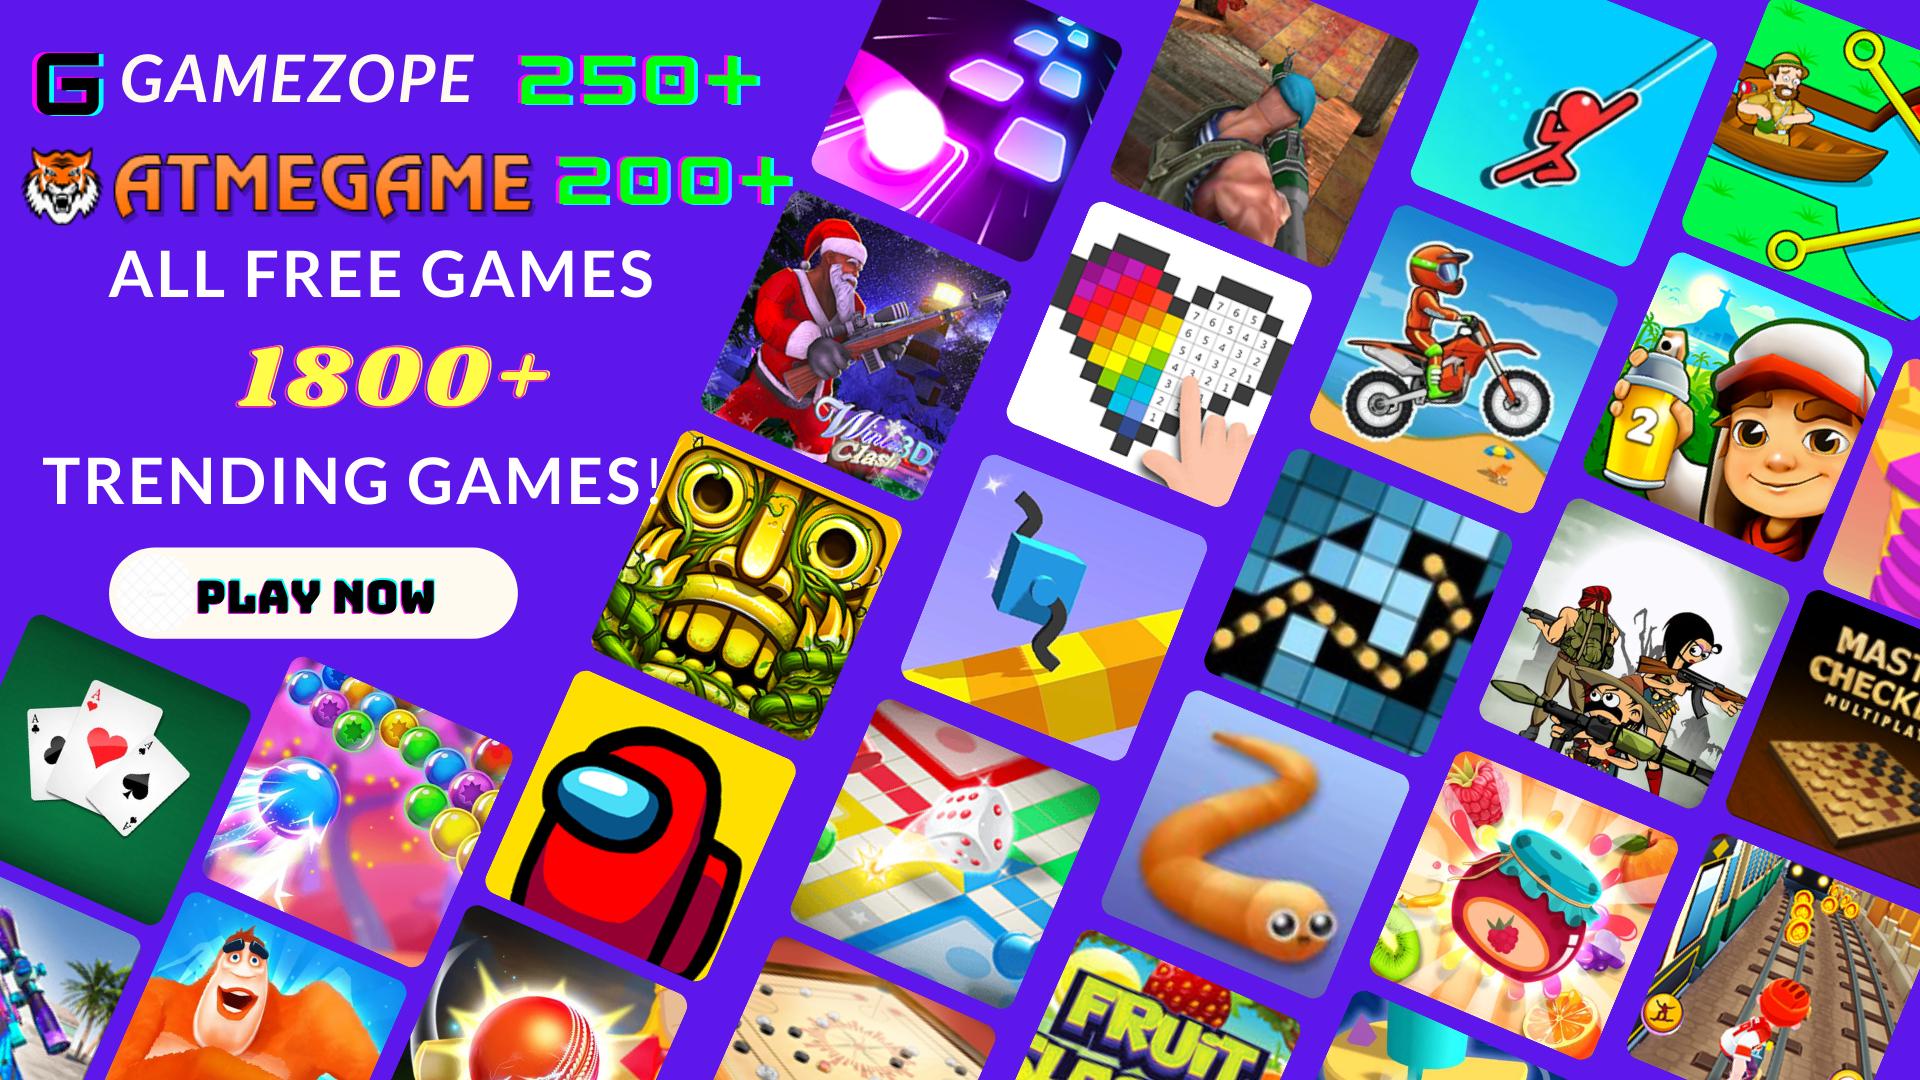 New Games, All Games, Gamezop Pro, All in one Game 1.1.7 Screenshot 11